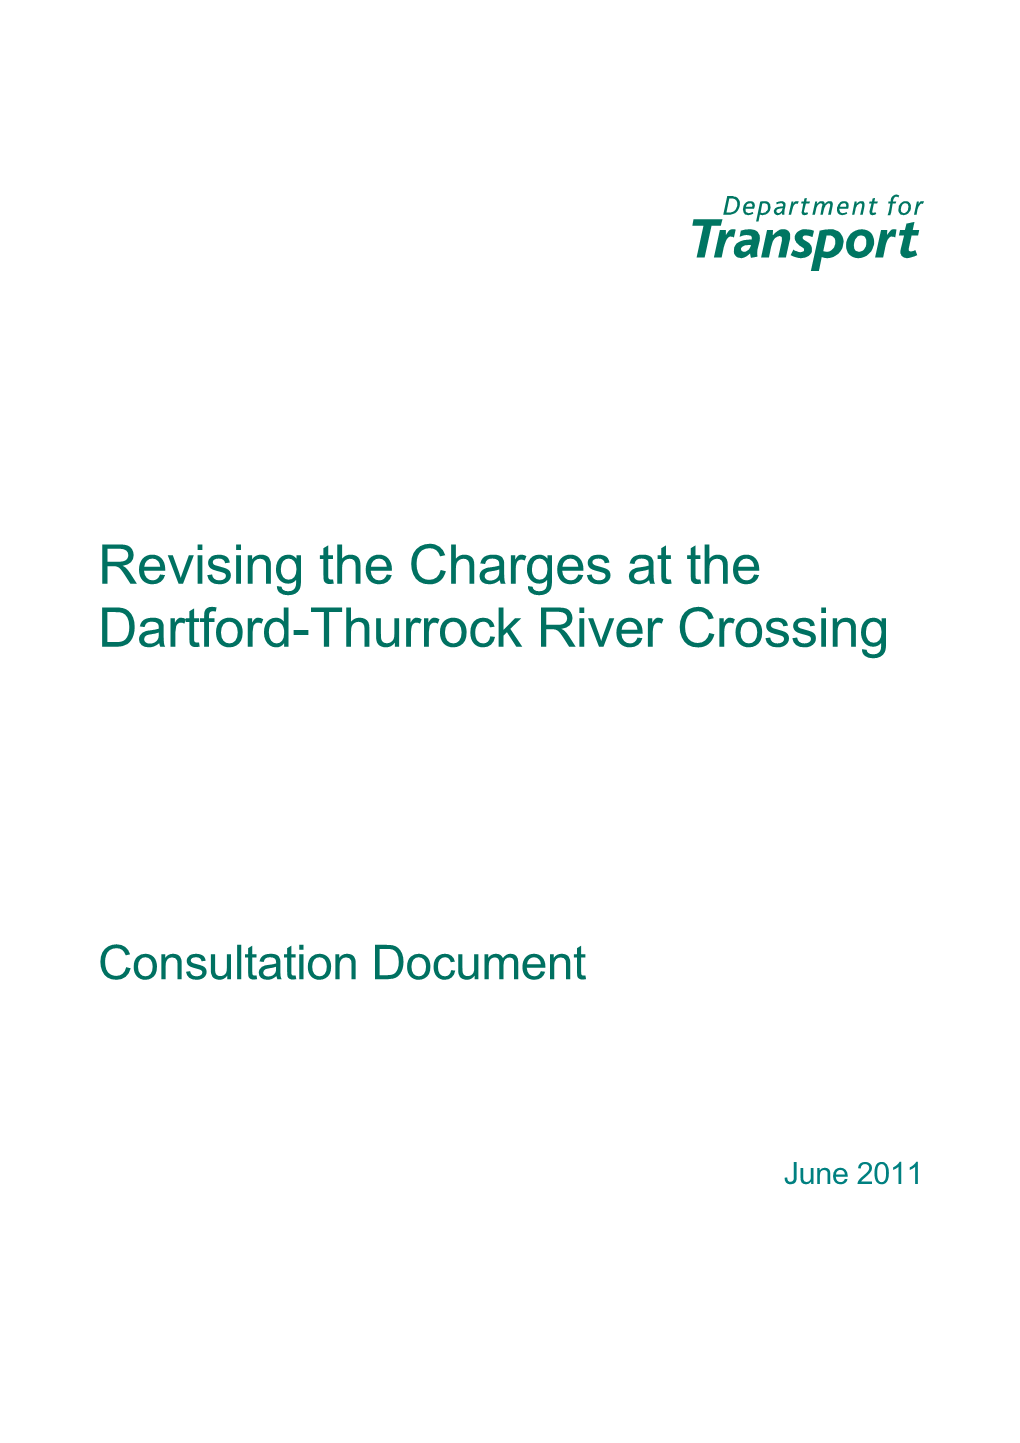 Revising the Charges at Dartford-Thurrock River Crossing - Dft-2011-08 - Consultation Document